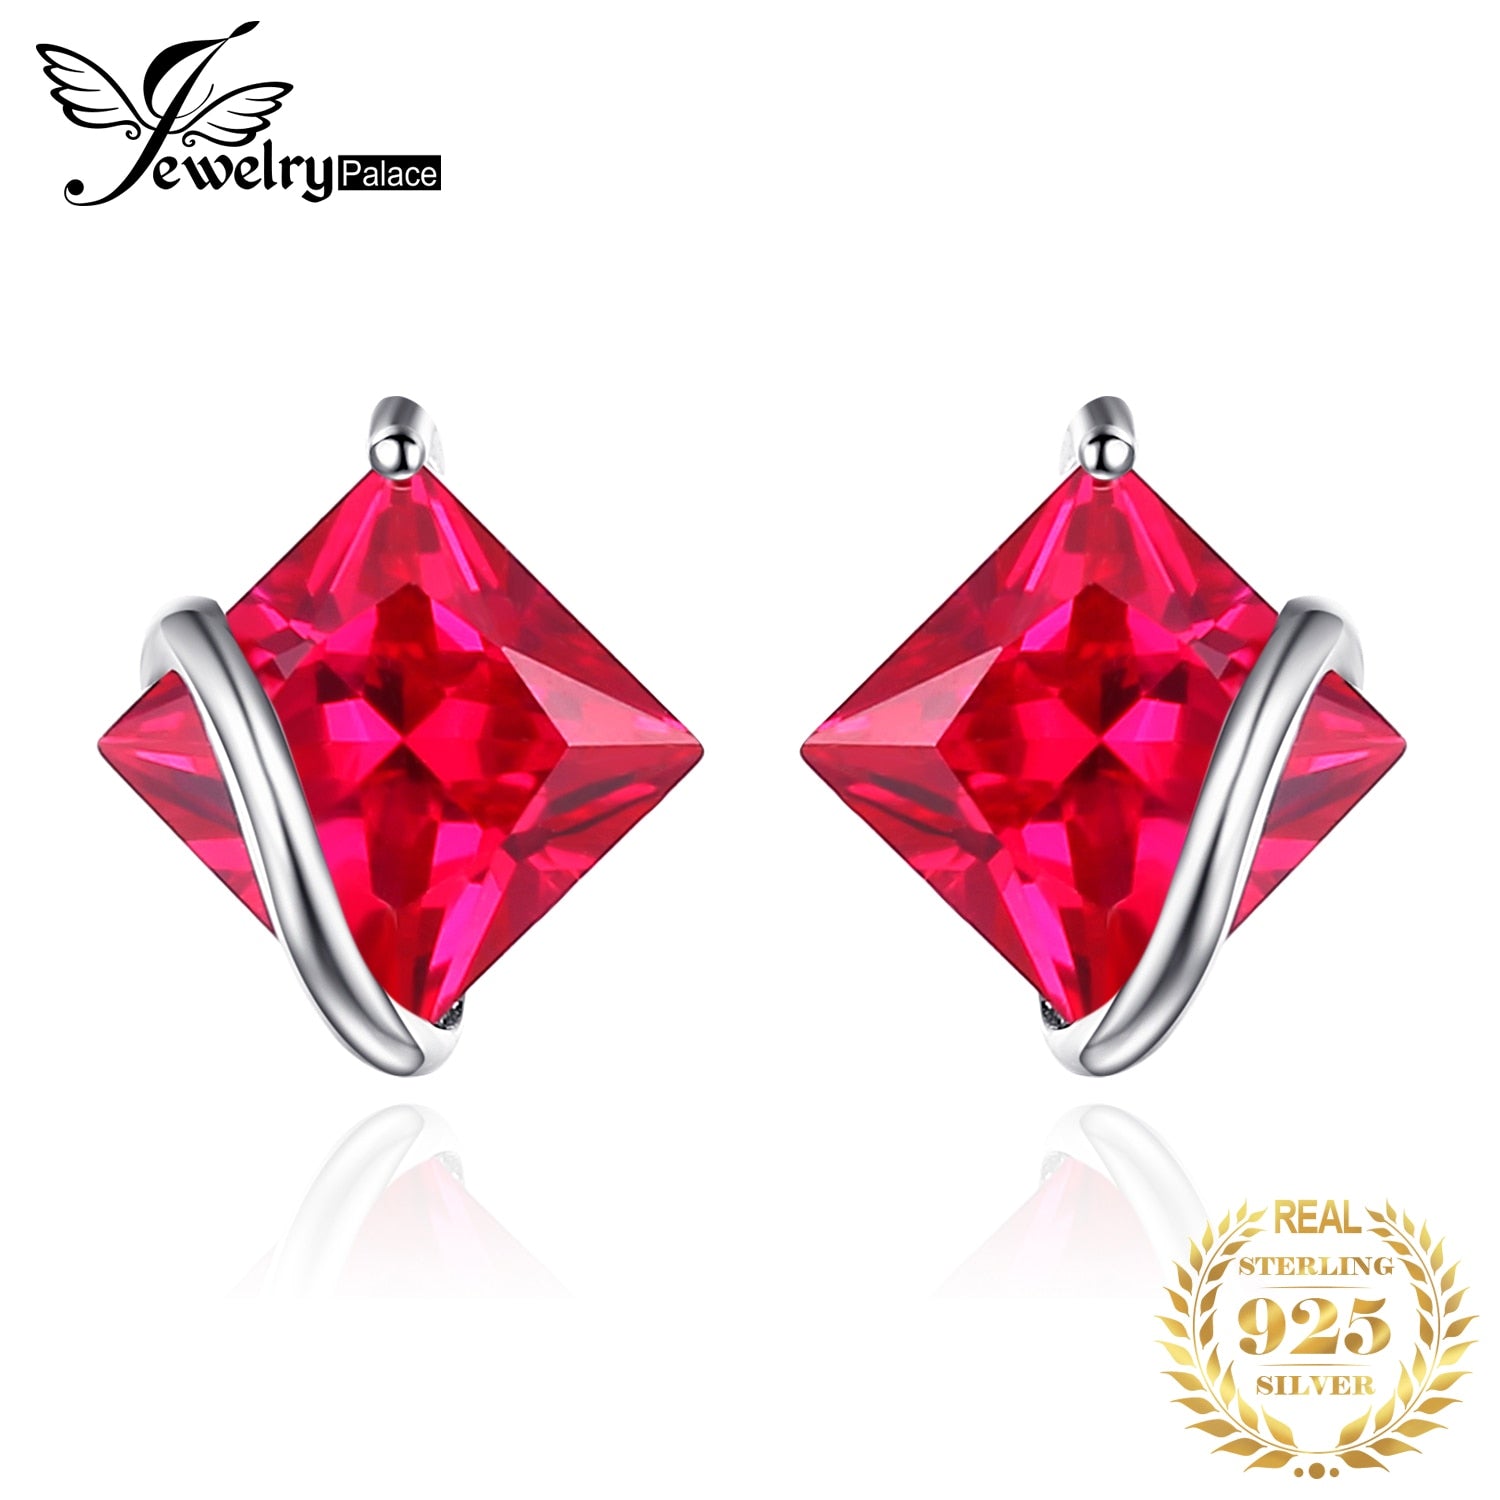 JewelryPalace Square Created Red Ruby 925 Sterling Silver Stud Earrings for Women Fashion Jewelry Gemstone Silver Earrings Default Title